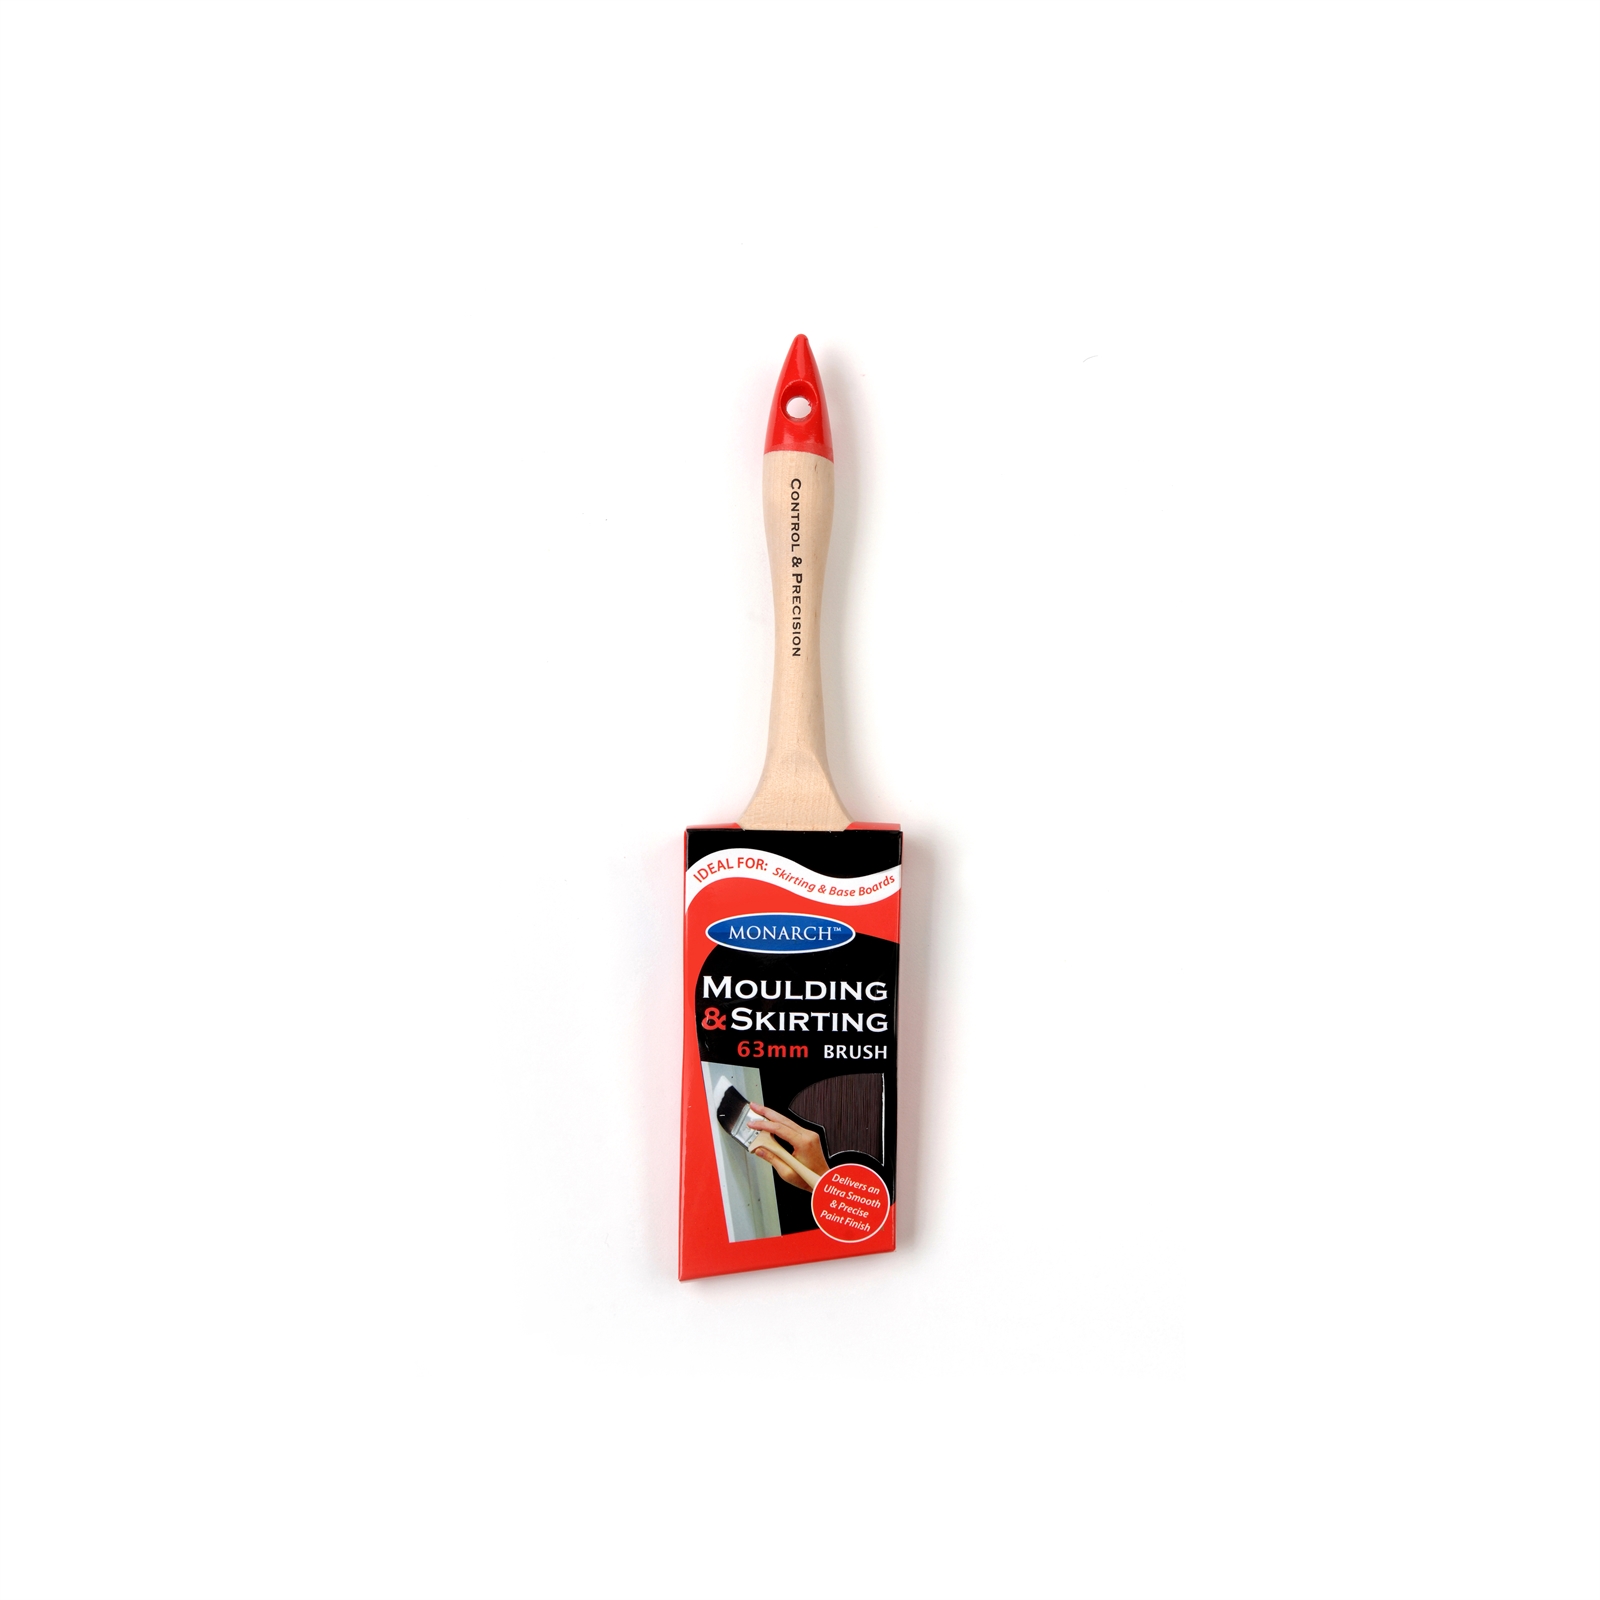 Monarch 63mm Moulding And Skirting Synthetic Paint Brush